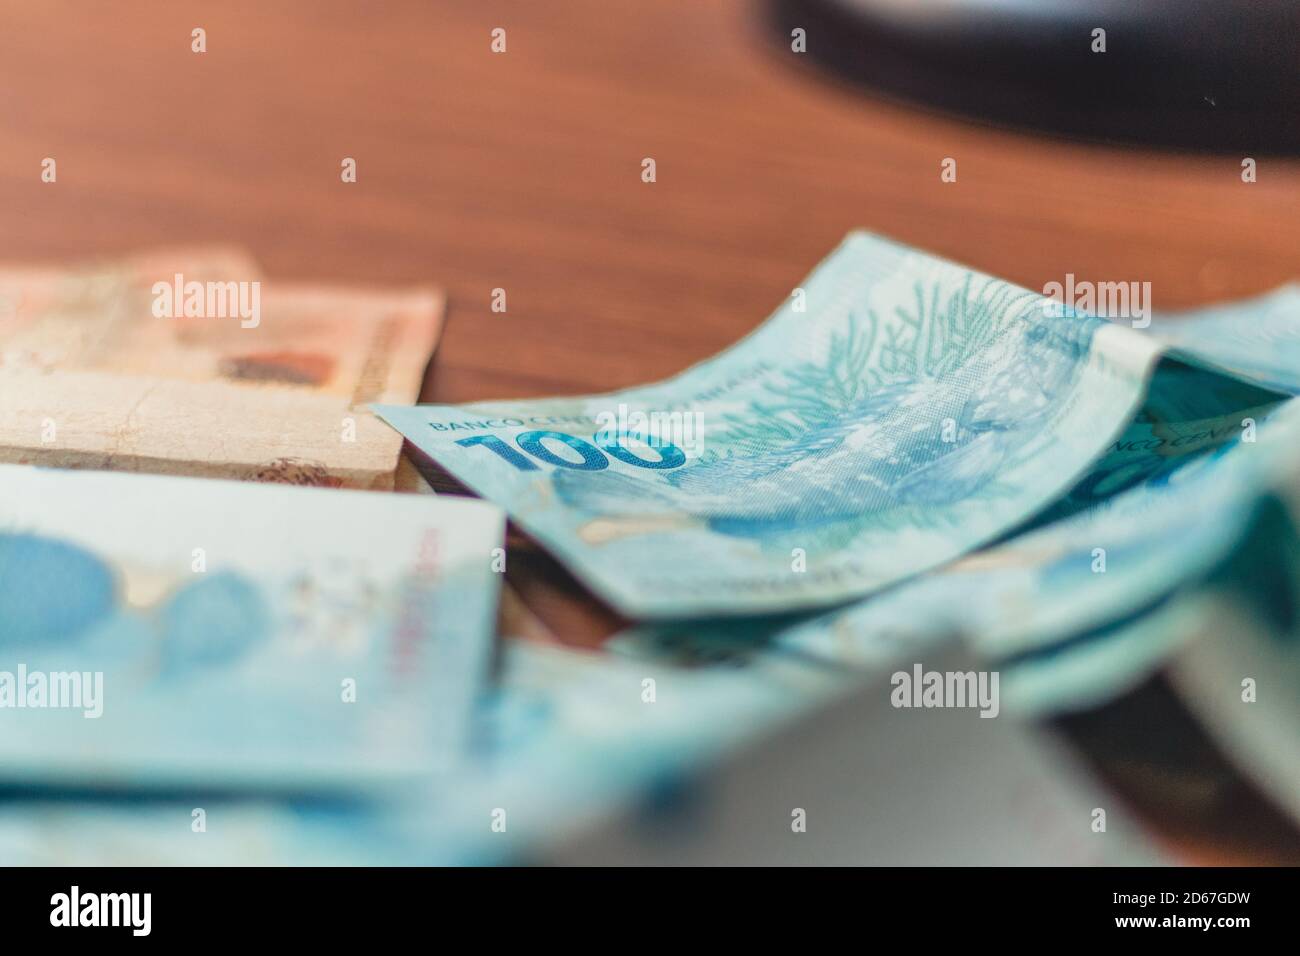 Money from Brazil. Notes of Real, and coins, Brazilian currency, Brazil BRL. Concept of savings, salary, payment and funds. Stock Photo